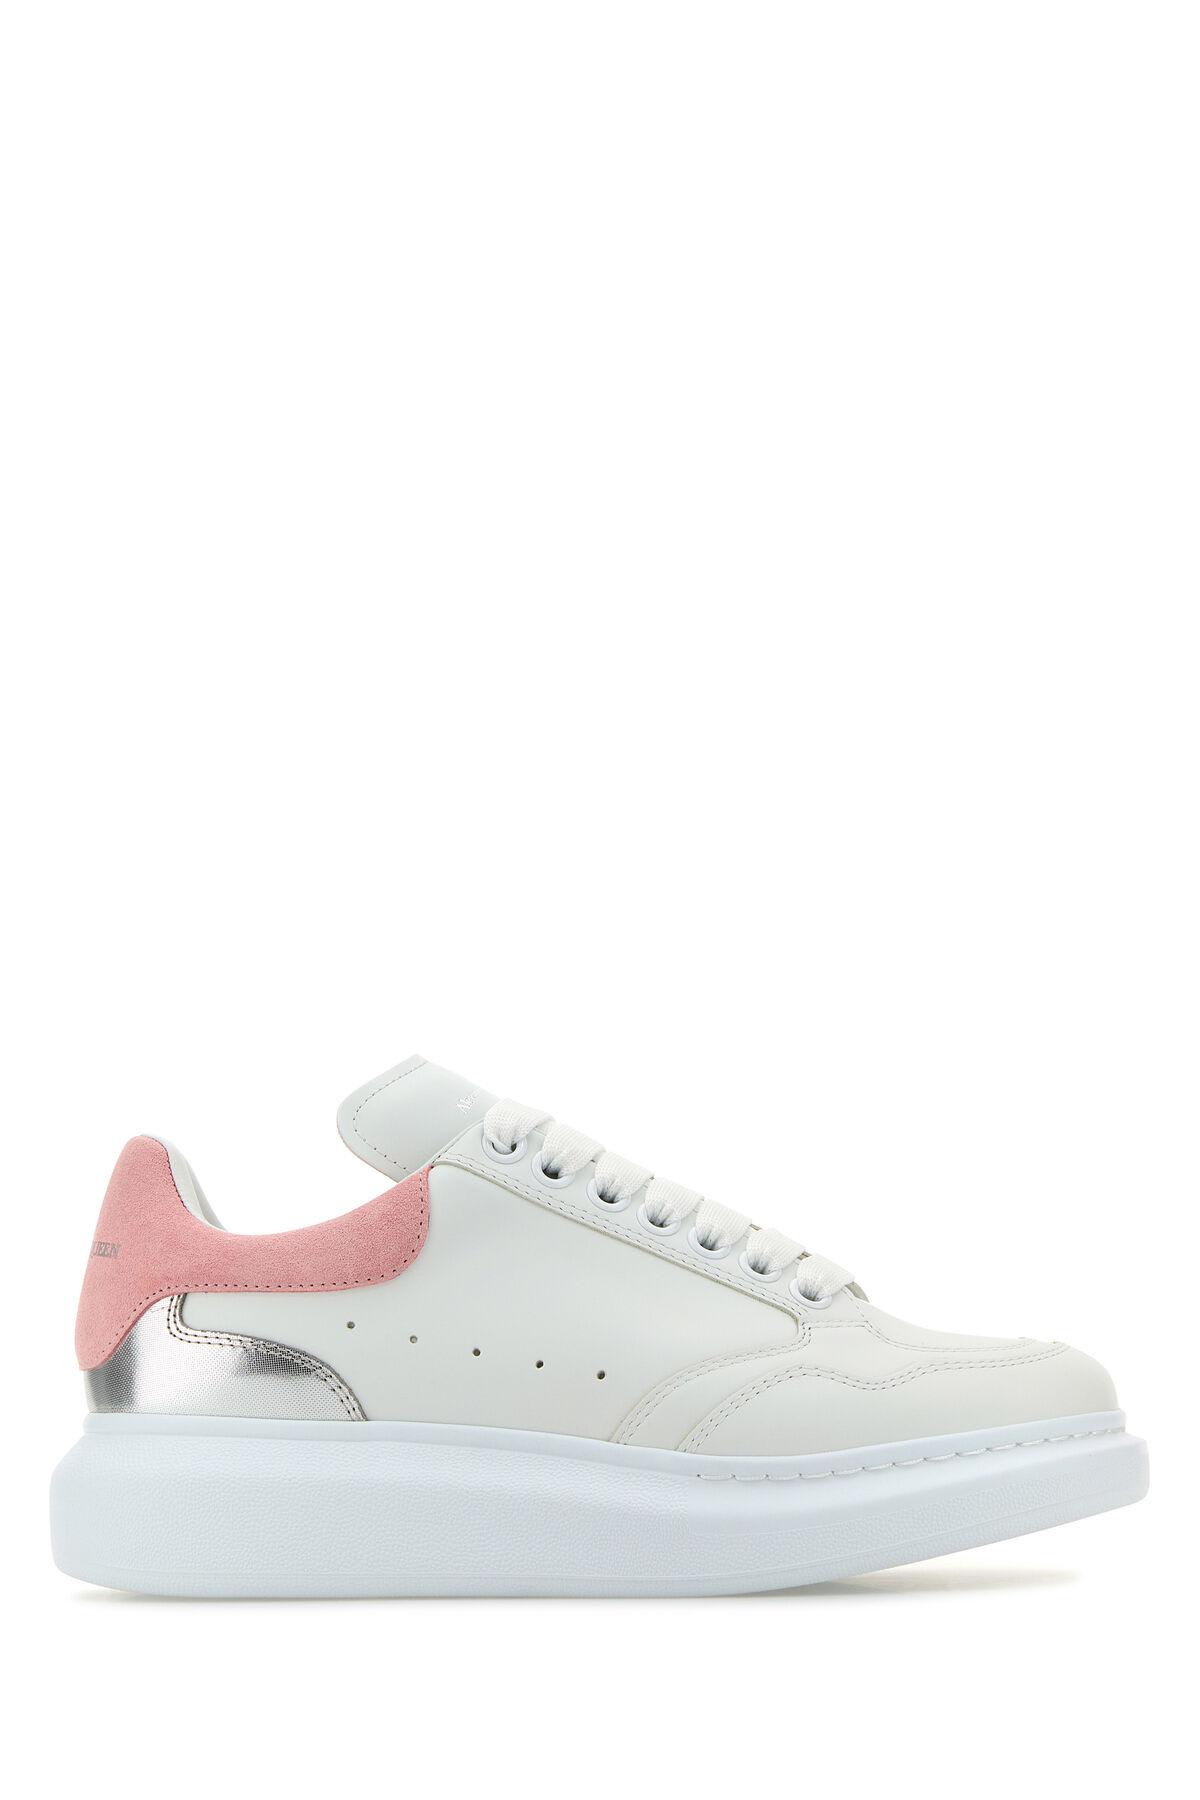 White Leather Sneakers With Pink Suede Heel